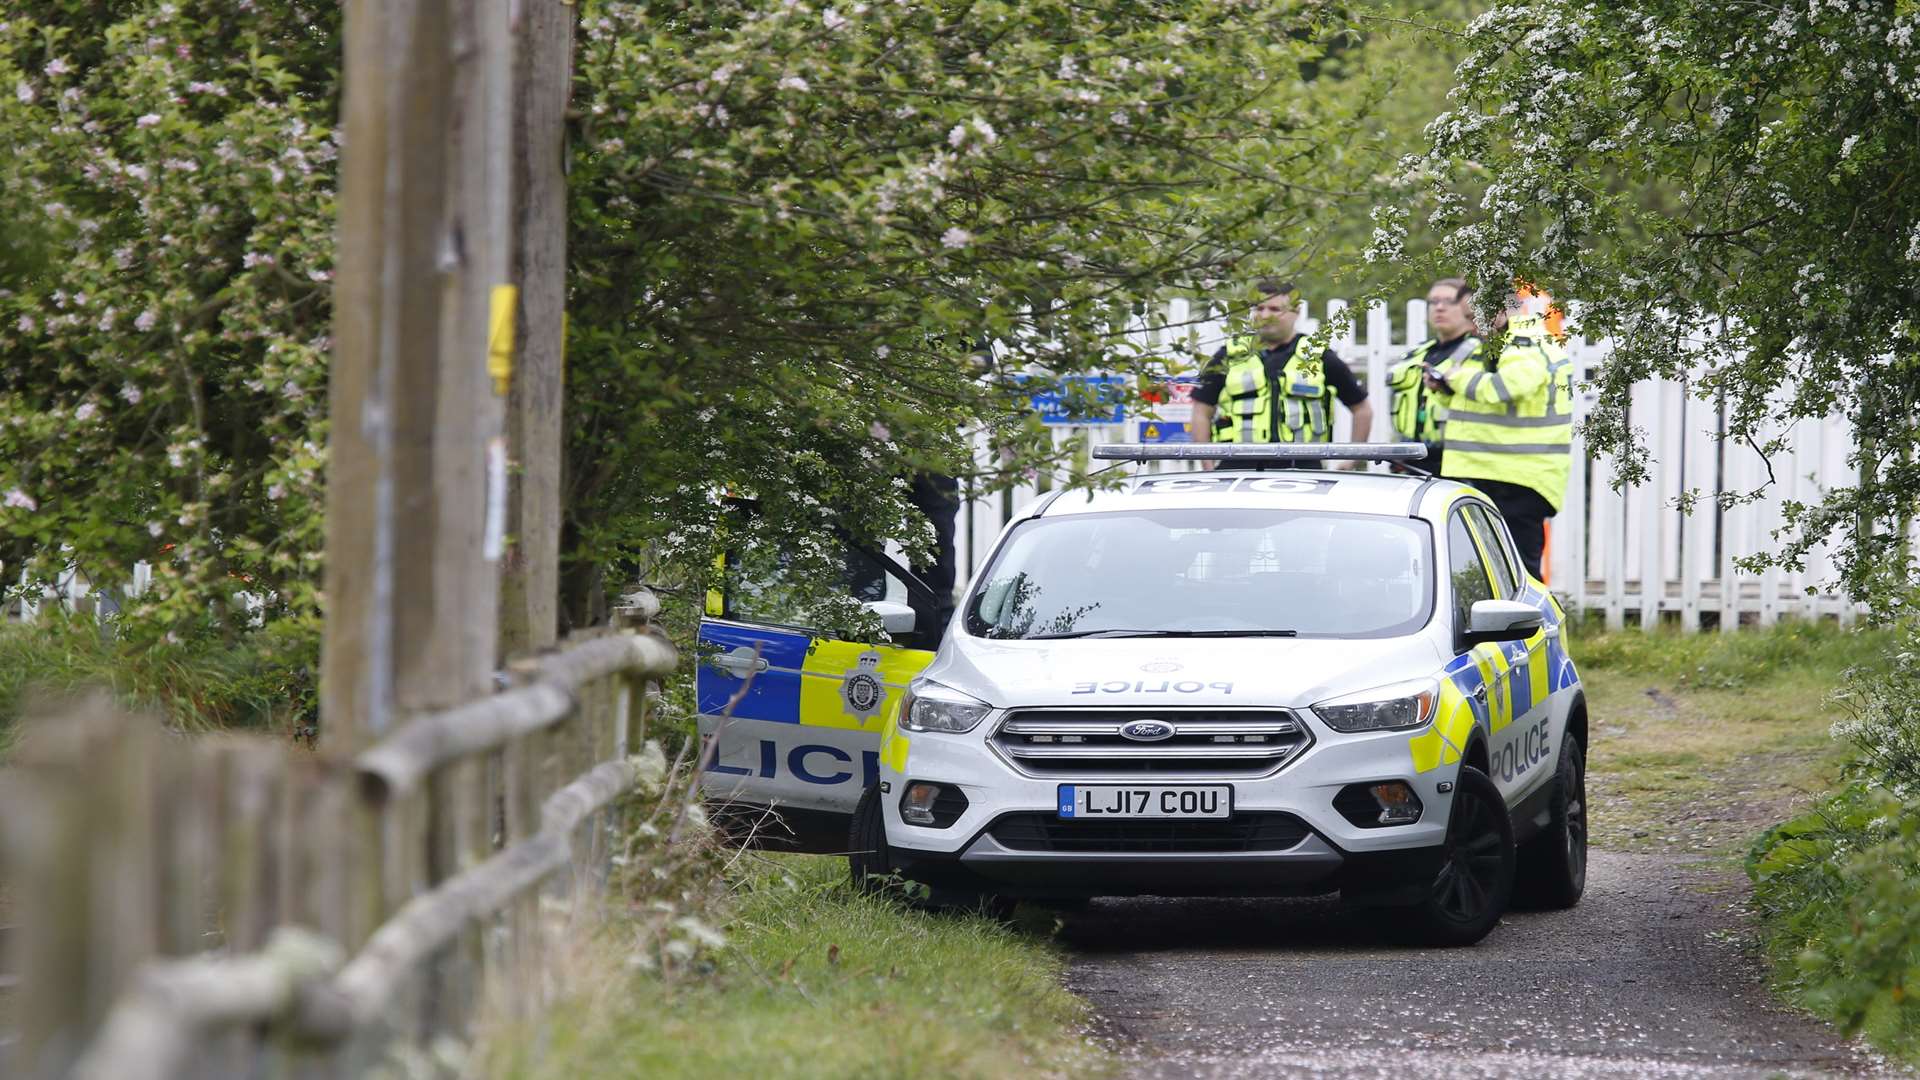 Police at the scene on Thursday. Picture: Andy Jones